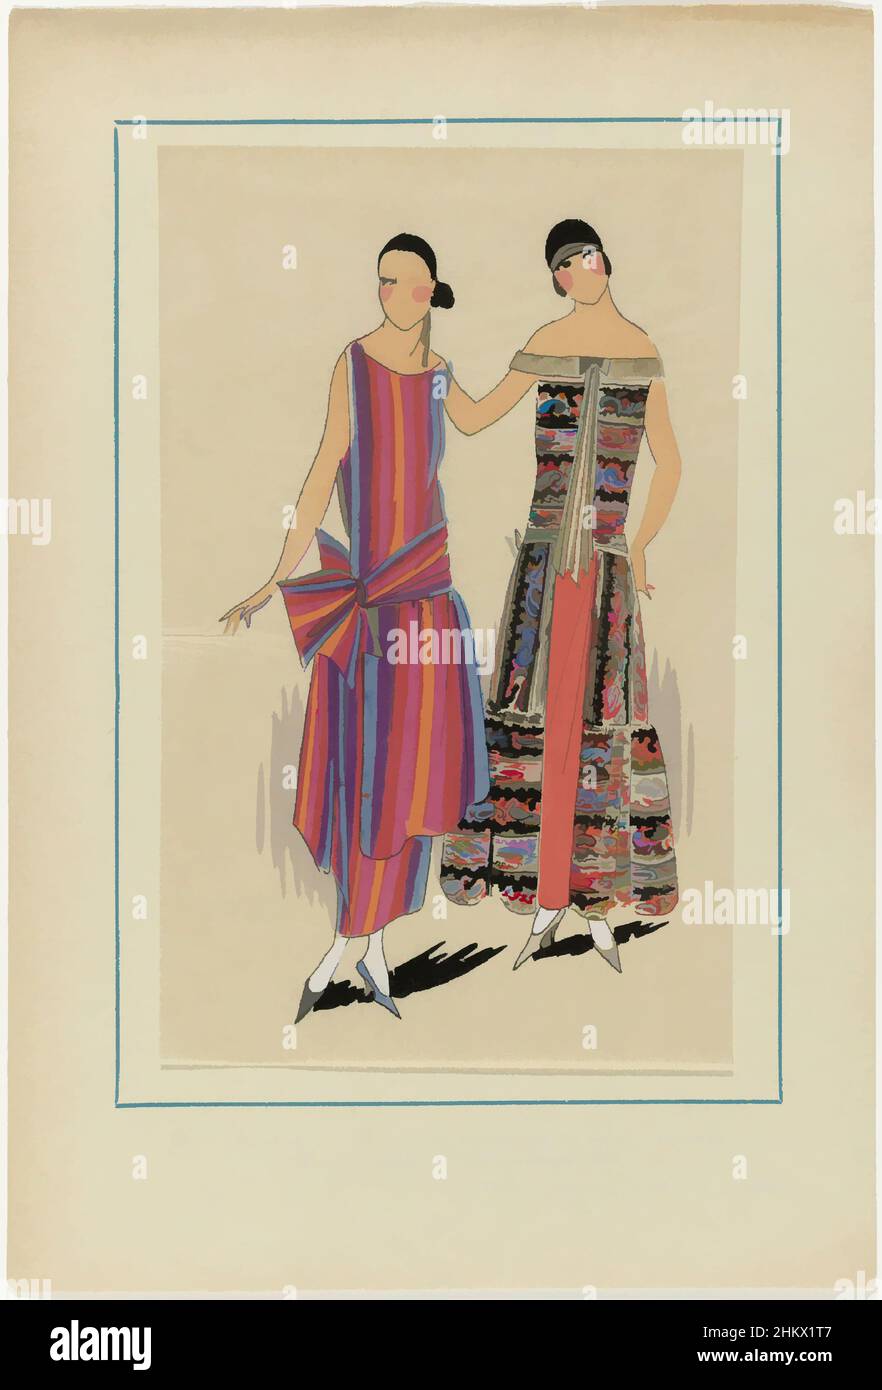 Art inspired by Très Parisien, 1923, No 5: 14.- ALCALA. - 1. Une robe du soir..., 1. An evening gown of silk 'uni ombré et reversible' (?). 2. The other toilette is of golden 'pékin cachemire' (cashmere). Fabrics from Chavanis et Cie. Print from the fashion magazine Très Parisien (1920-, Classic works modernized by Artotop with a splash of modernity. Shapes, color and value, eye-catching visual impact on art. Emotions through freedom of artworks in a contemporary way. A timeless message pursuing a wildly creative new direction. Artists turning to the digital medium and creating the Artotop NFT Stock Photo